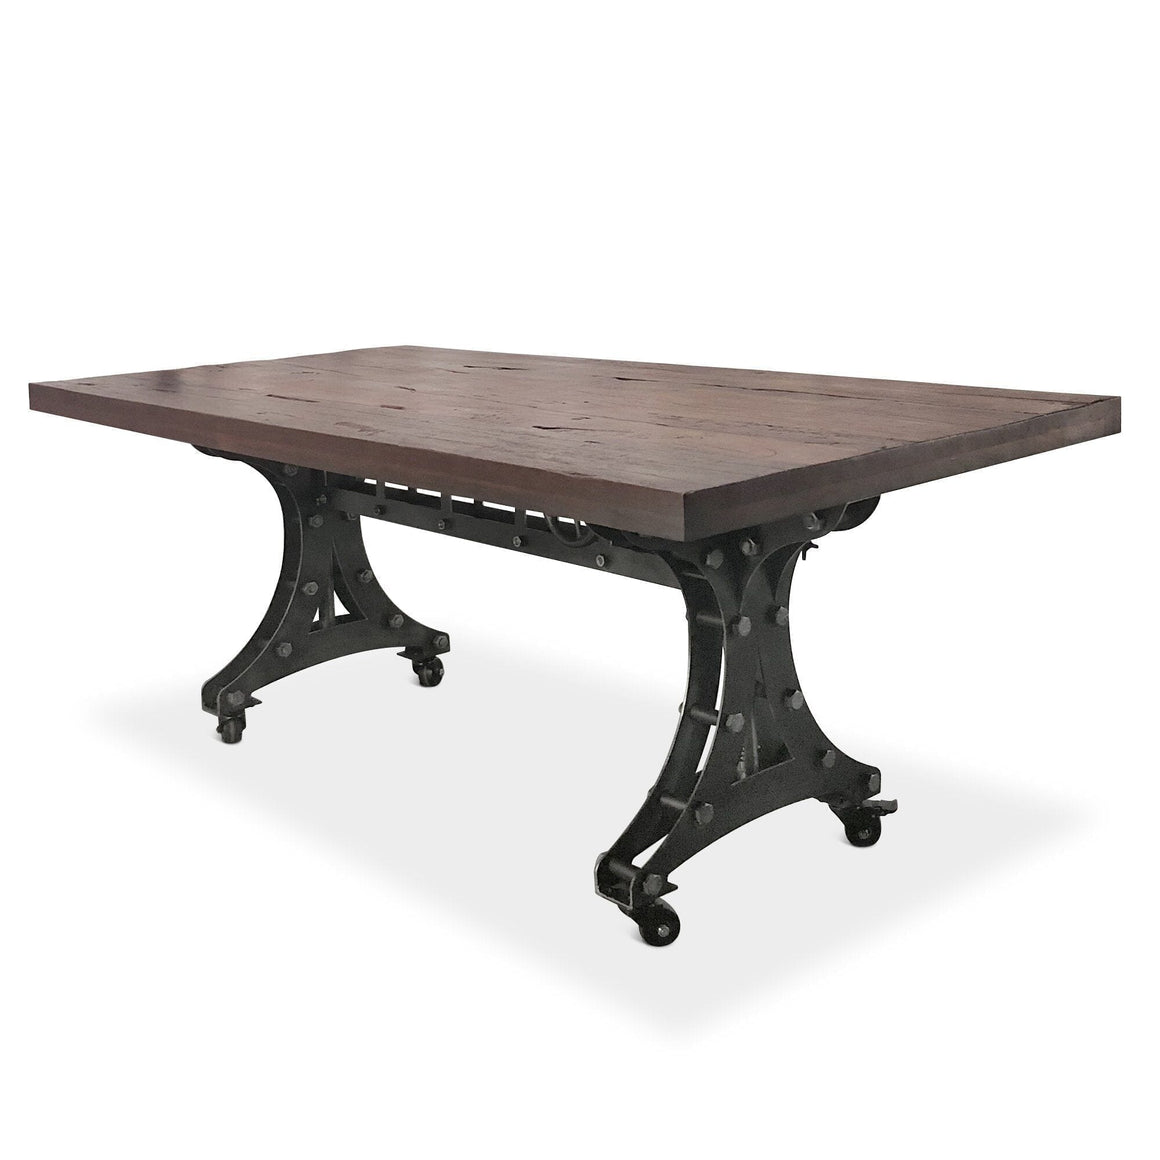 Longeron Industrial Dining Table - Adjustable - Casters - Rustic Mahogany - Rustic Deco Incorporated